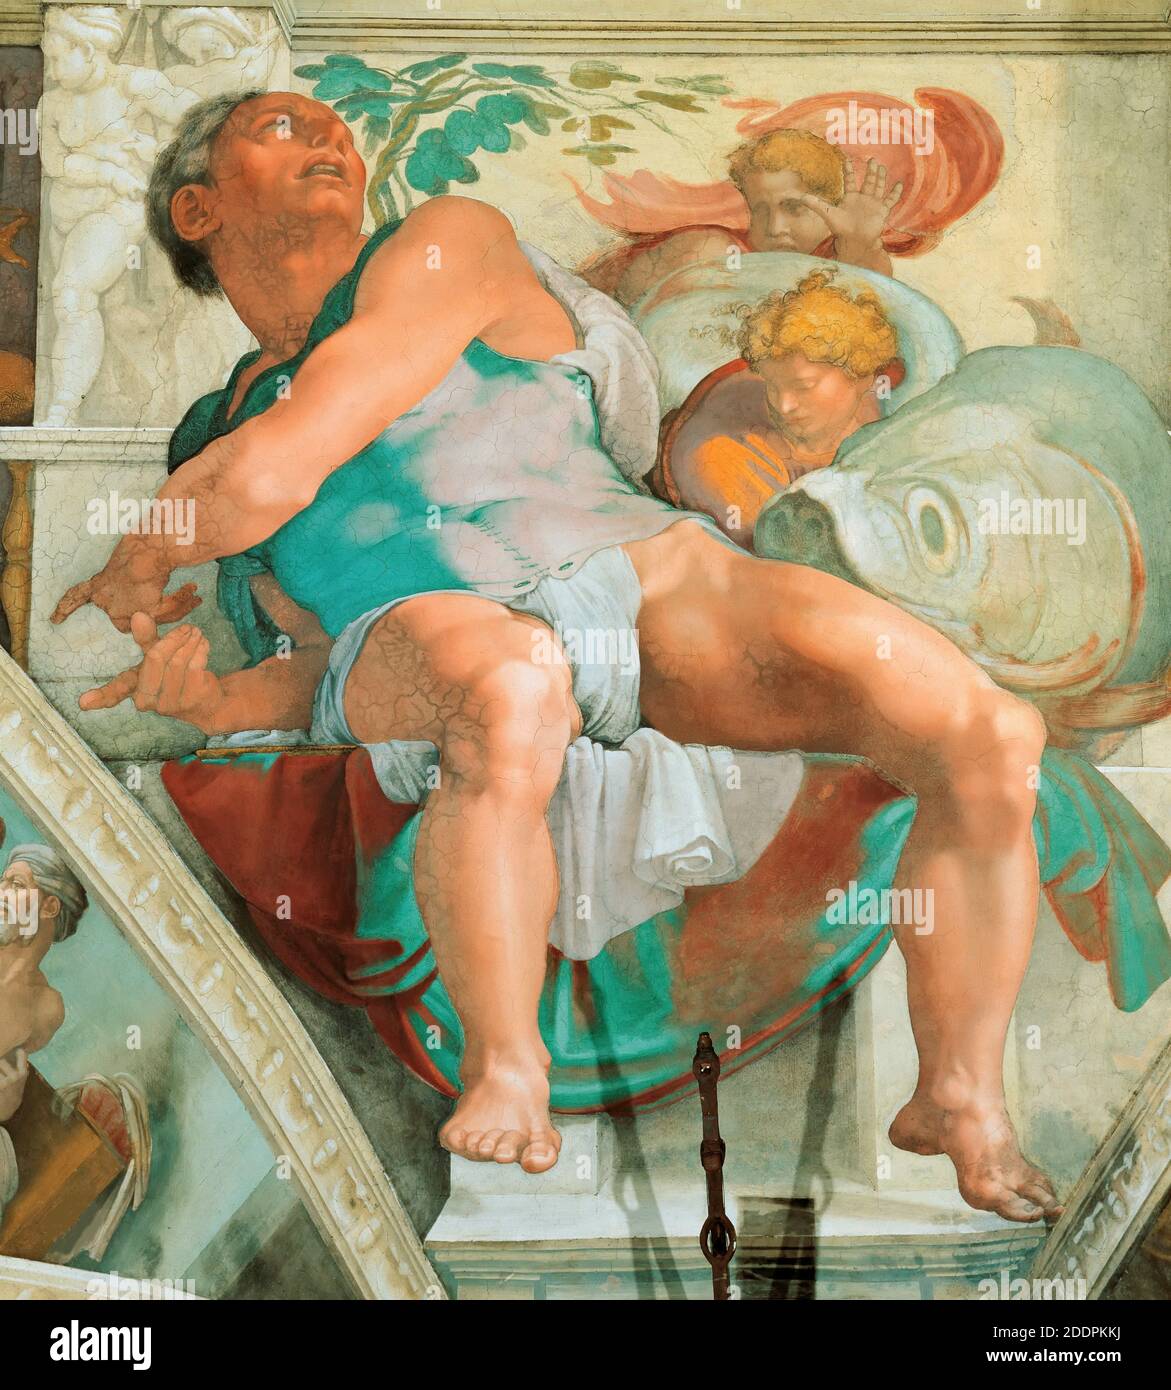 Prophets and Sibyls: Jonah (Sistine Chapel ceiling in the Vatican). Photo after restoration. Museum: The Sistine Chapel, Vatican. Author: MICHELANGELO BUONARROTI. Stock Photo